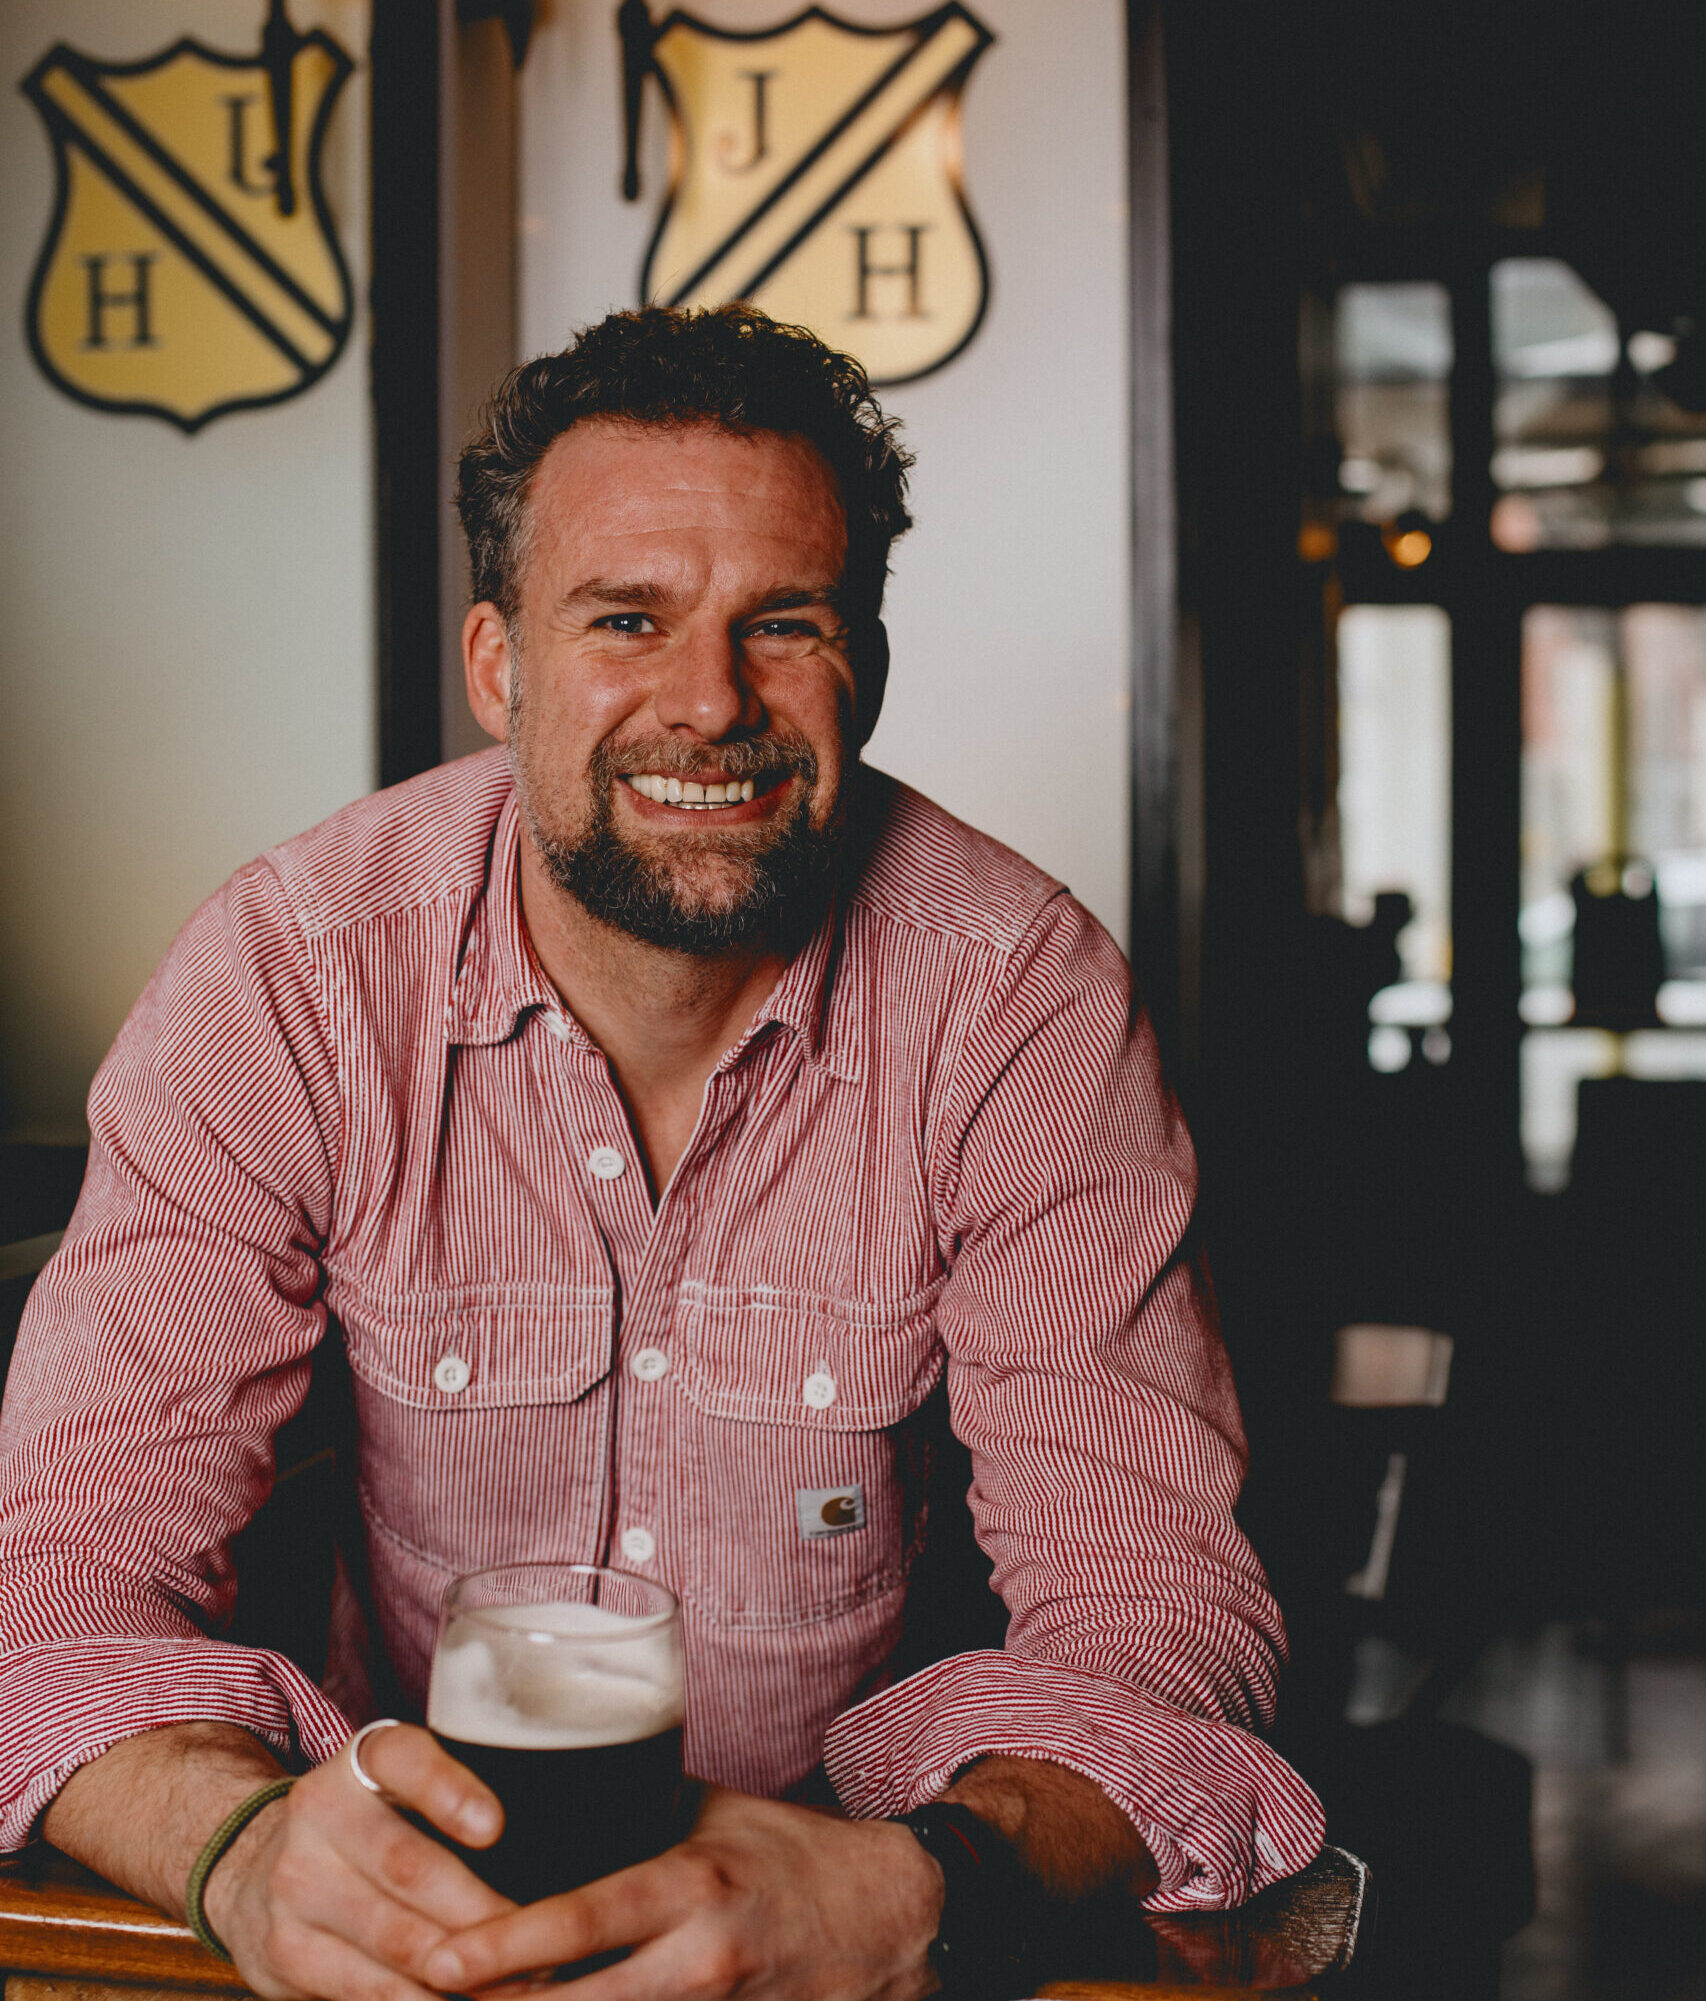 A man leaning over smiling holding a pint of Bitter.